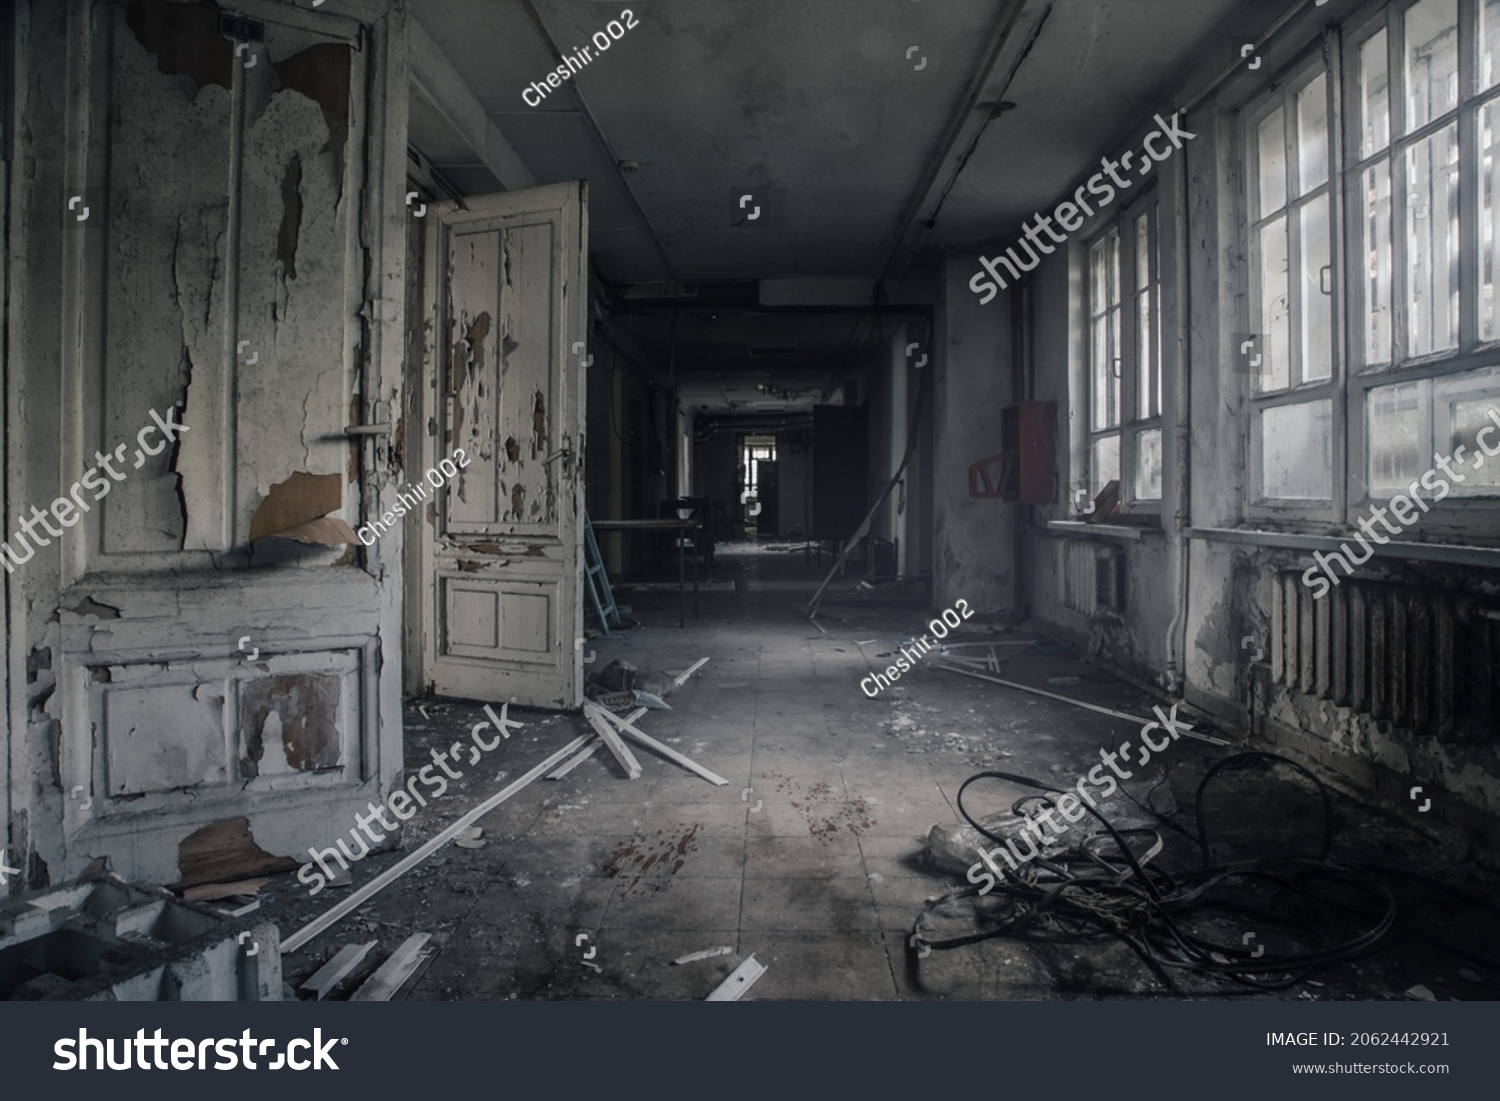 279,780 Creepy fearful Images, Stock Photos & Vectors | Shutterstock